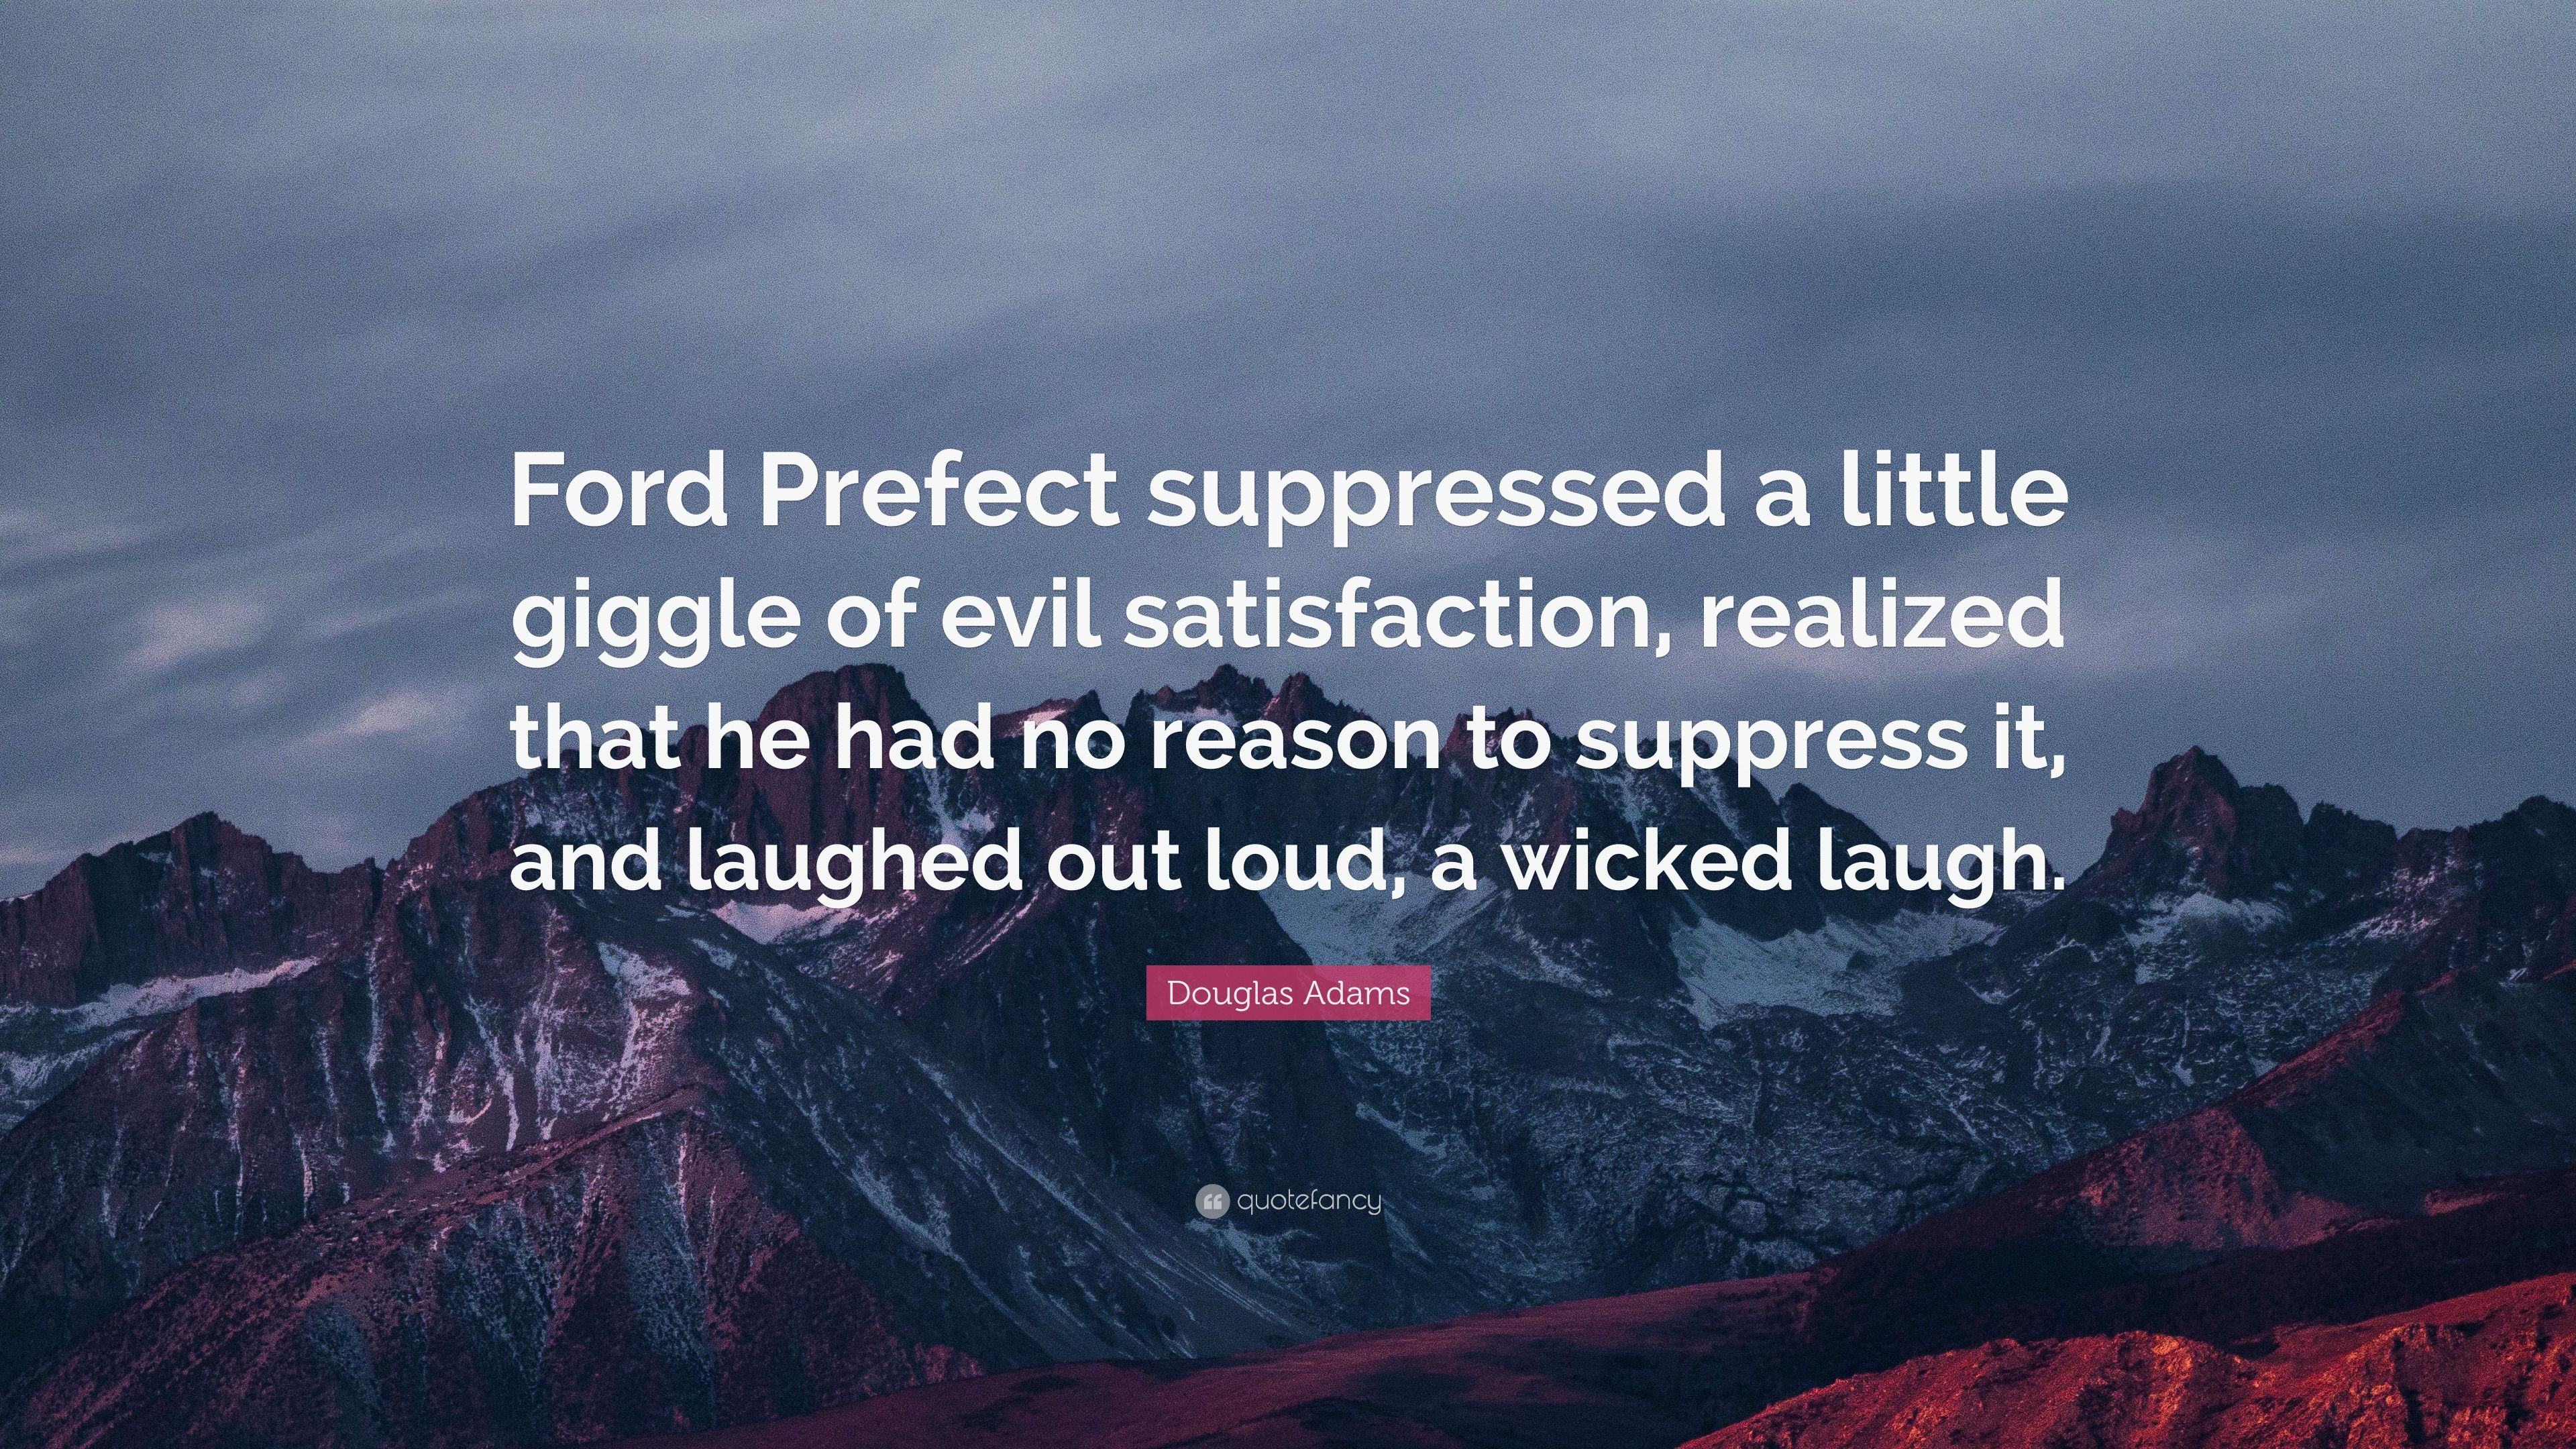 Douglas Adams Quote: “Ford Prefect suppressed a little giggle